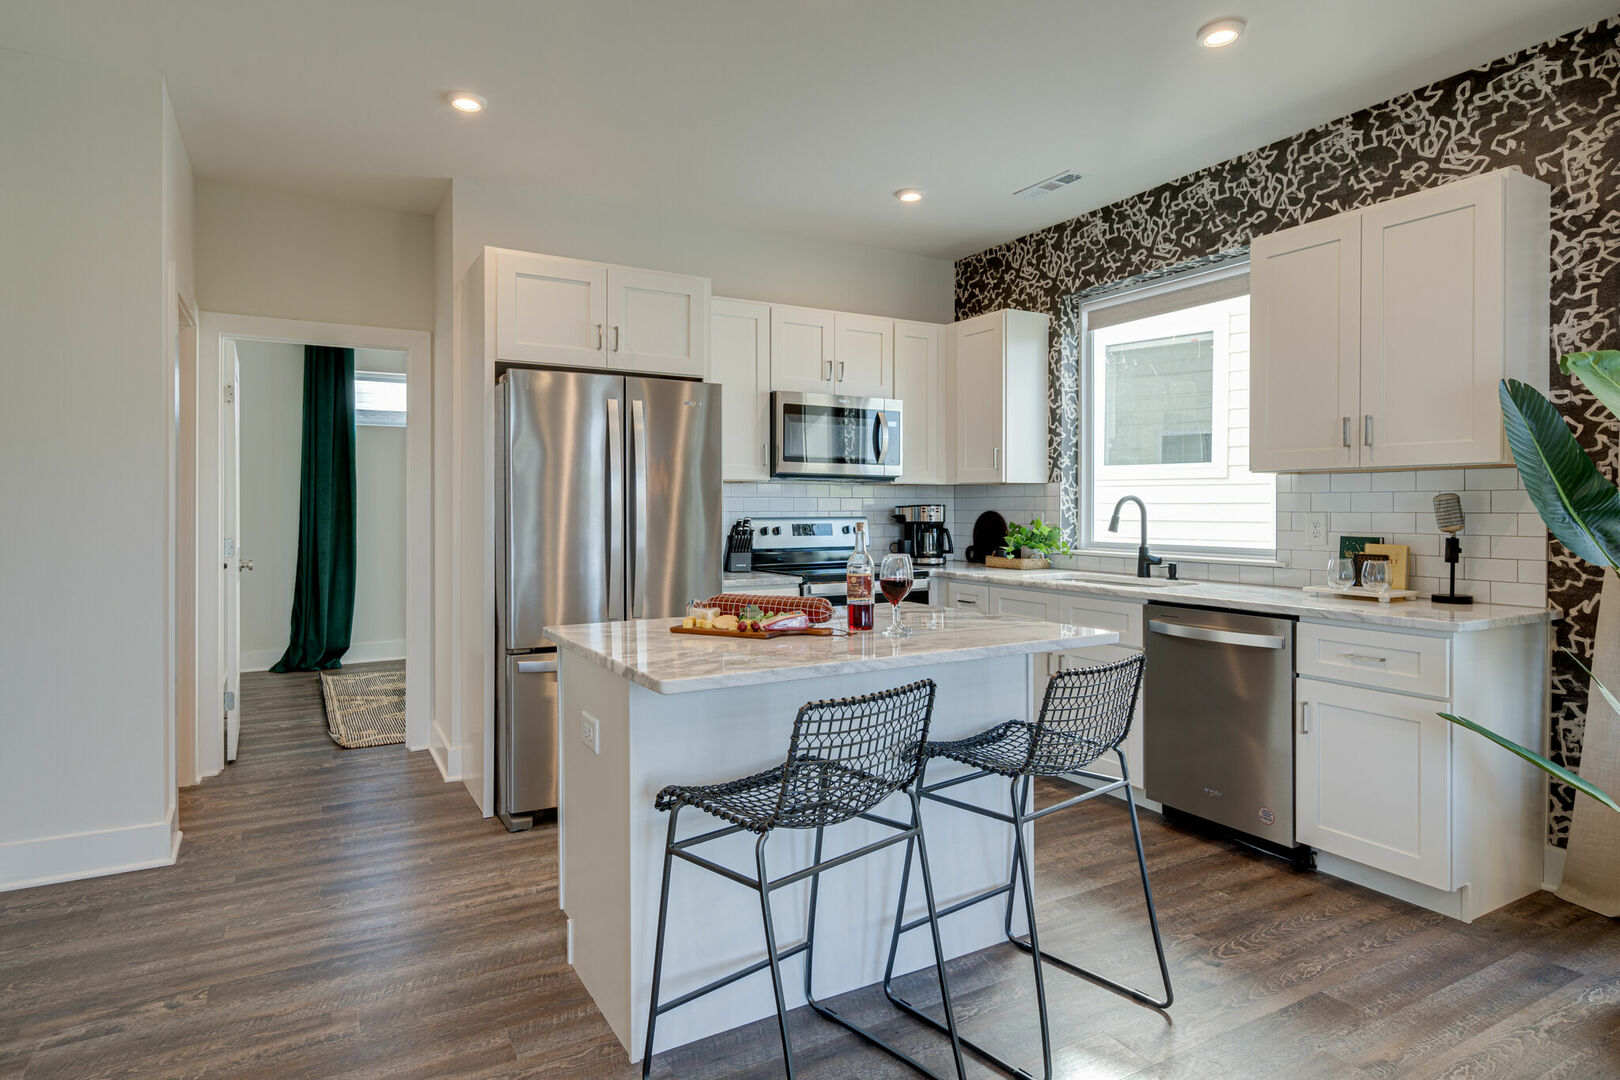 2nd Unit, 2nd Floor: Open kitchen with stainless steel appliances, large island, breakfast bar seating, and is fully equipped with your basic cooking essentials.